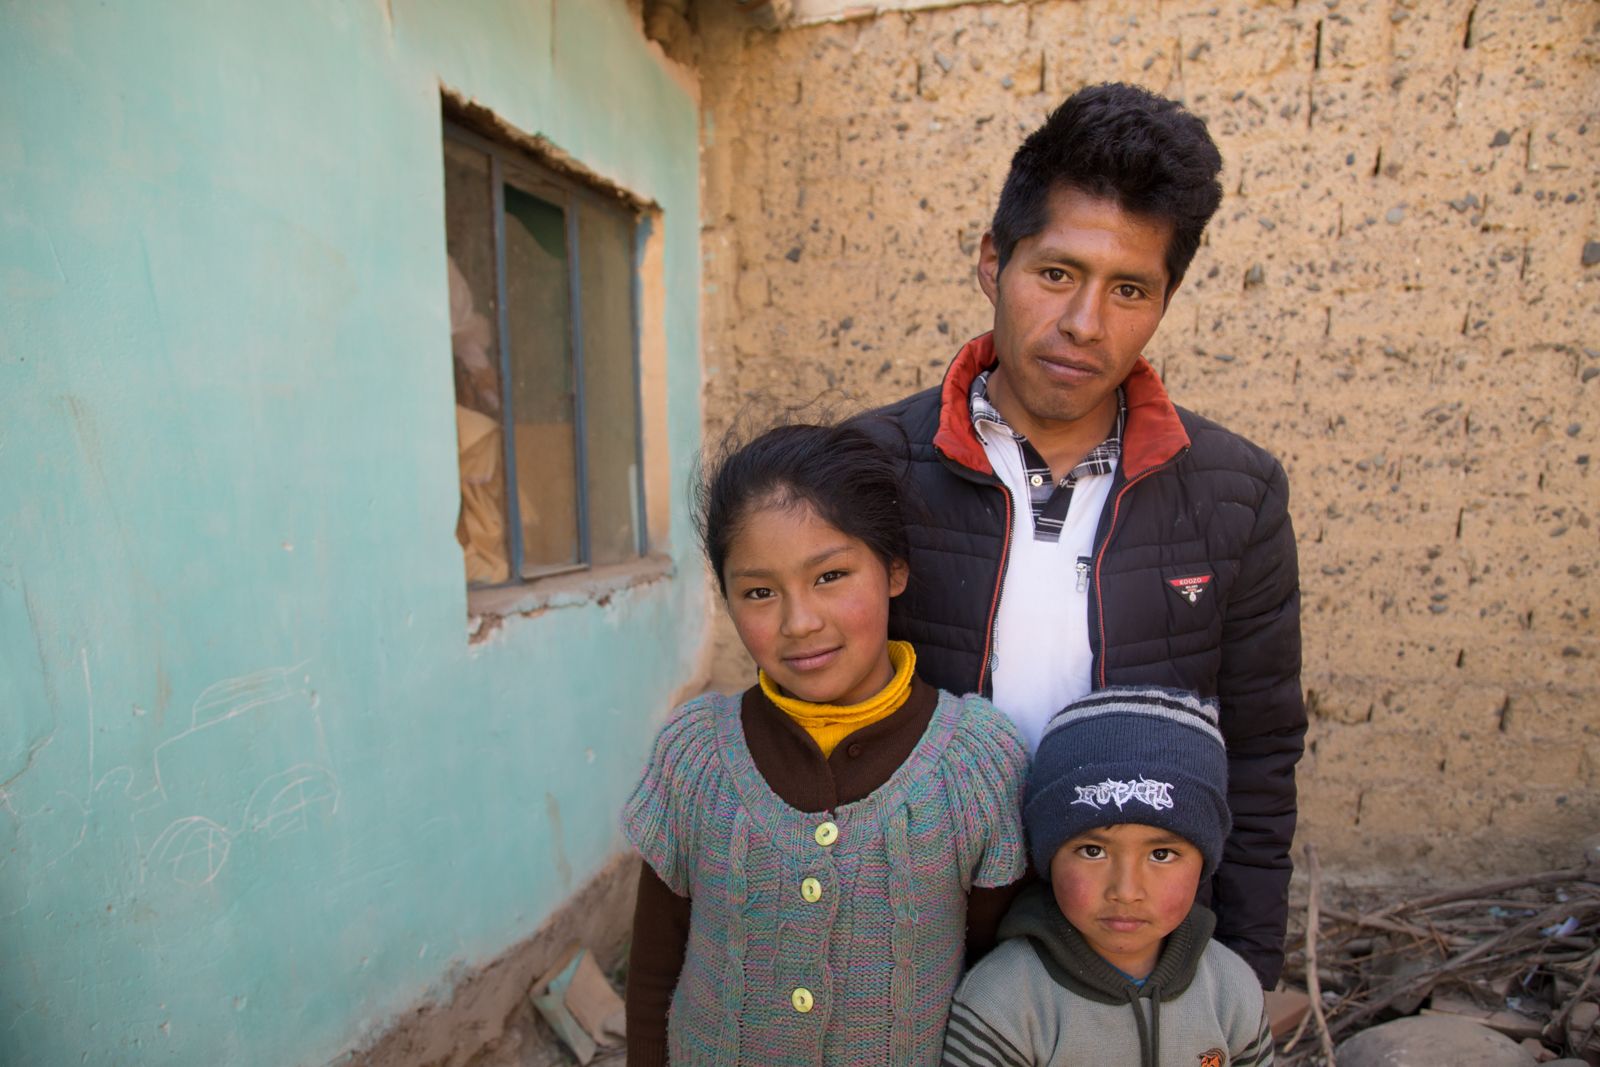 Victor Corhuari has been searching for his sister, Zulma, who was 16 when she went missing in April 2017. He is a single father and lives with his daughter Deysi, his son Neymar, and his sister's child, not shown. Image by Tracey Eaton. Bolivia, 2017.